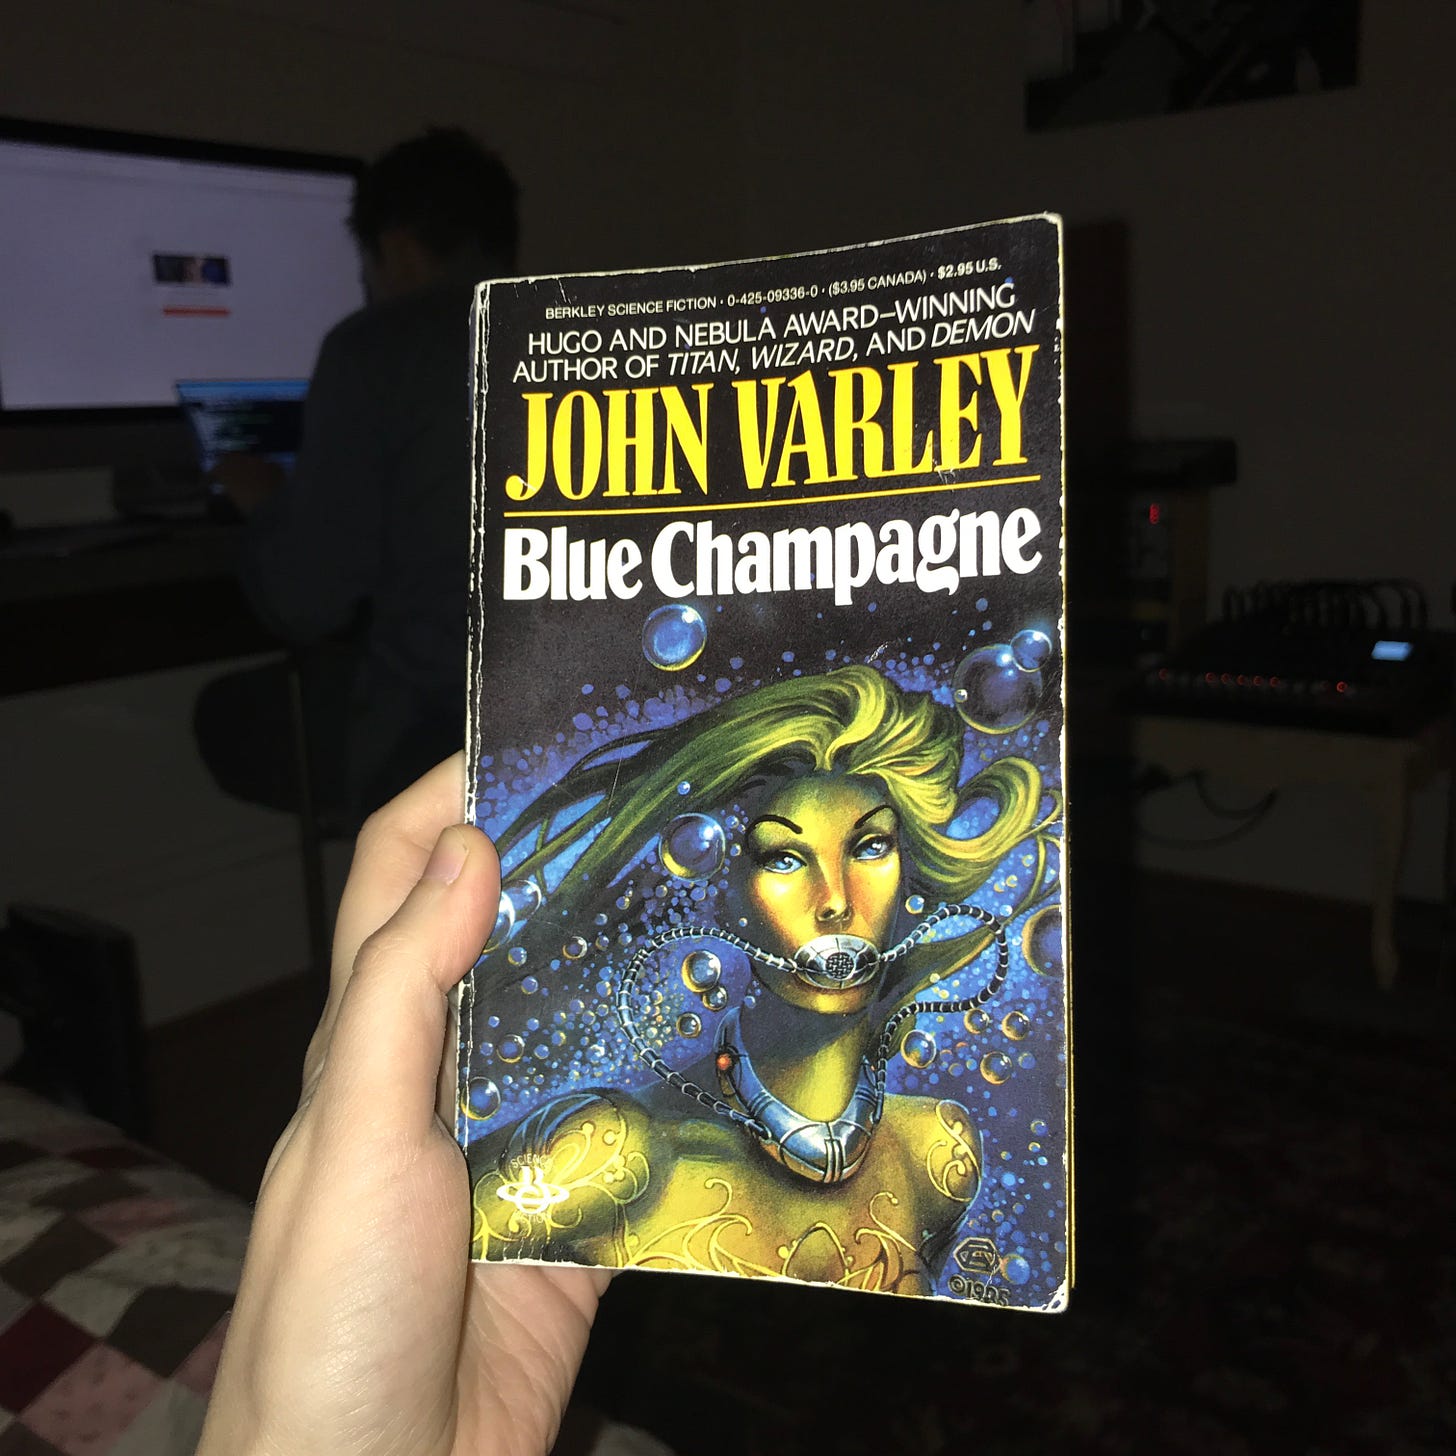 My hand holding a worn out copy of John Varley's short story paperback "Blue Champagne."